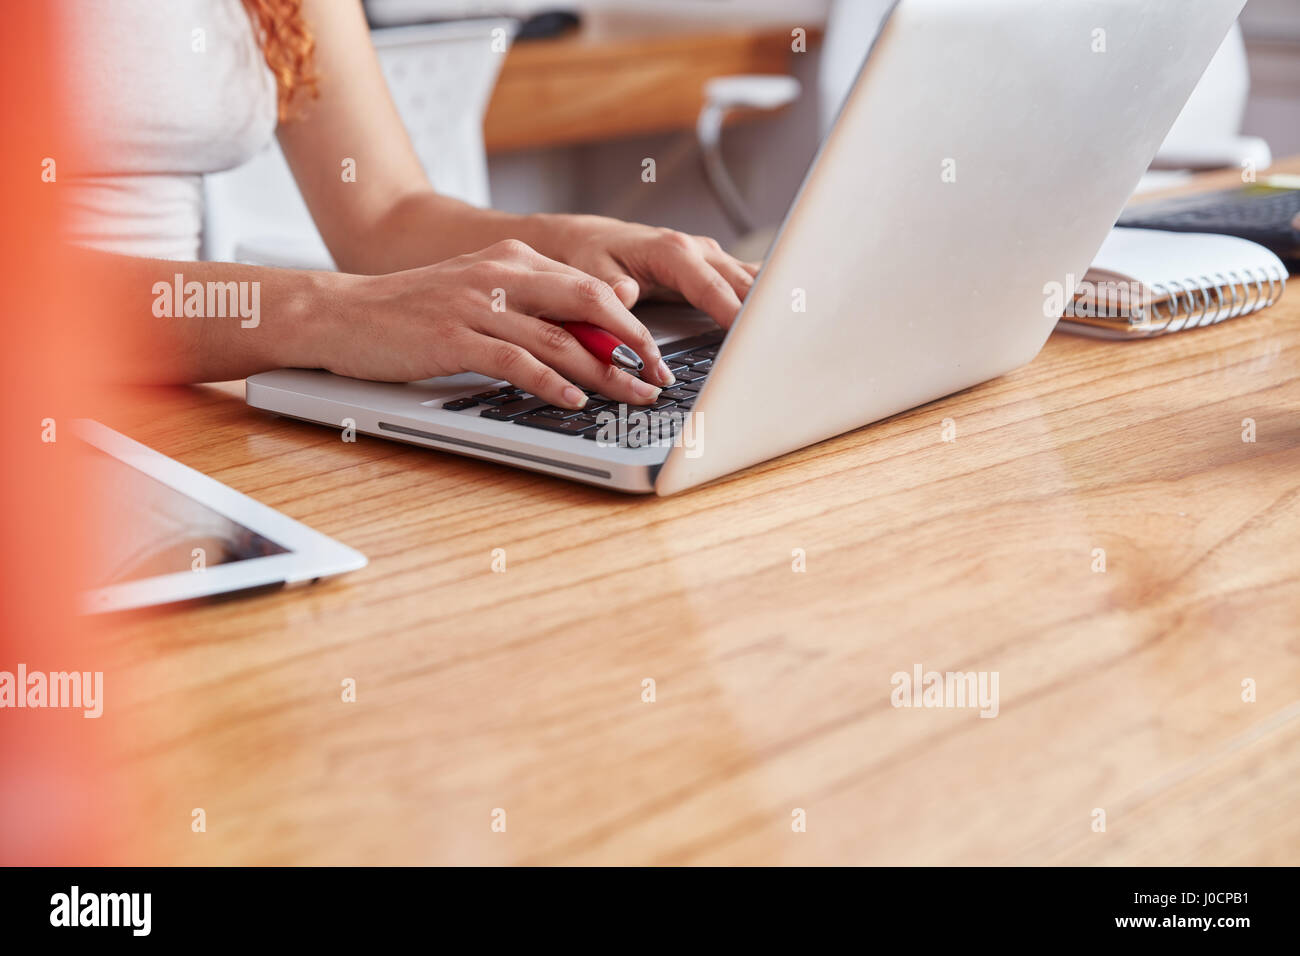 Woman in computer training learns with laptop Stock Photo